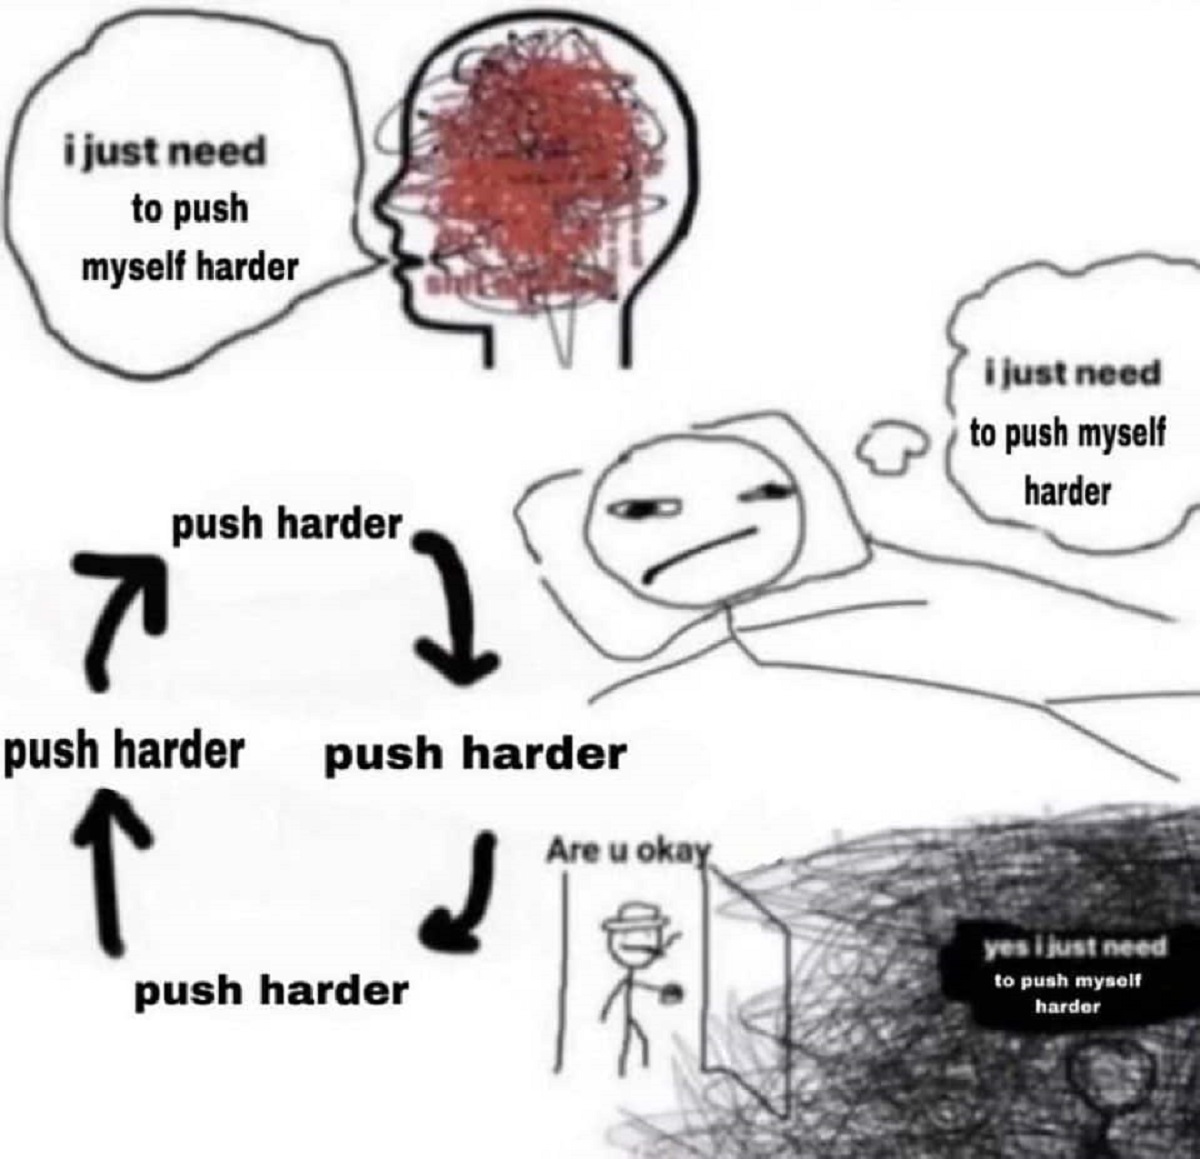 just need to lock in meme - i just need to push myself harder 7 push harder i just need to push myself harder push harder push harder push harder Are u okay yes i just need to push myself harder